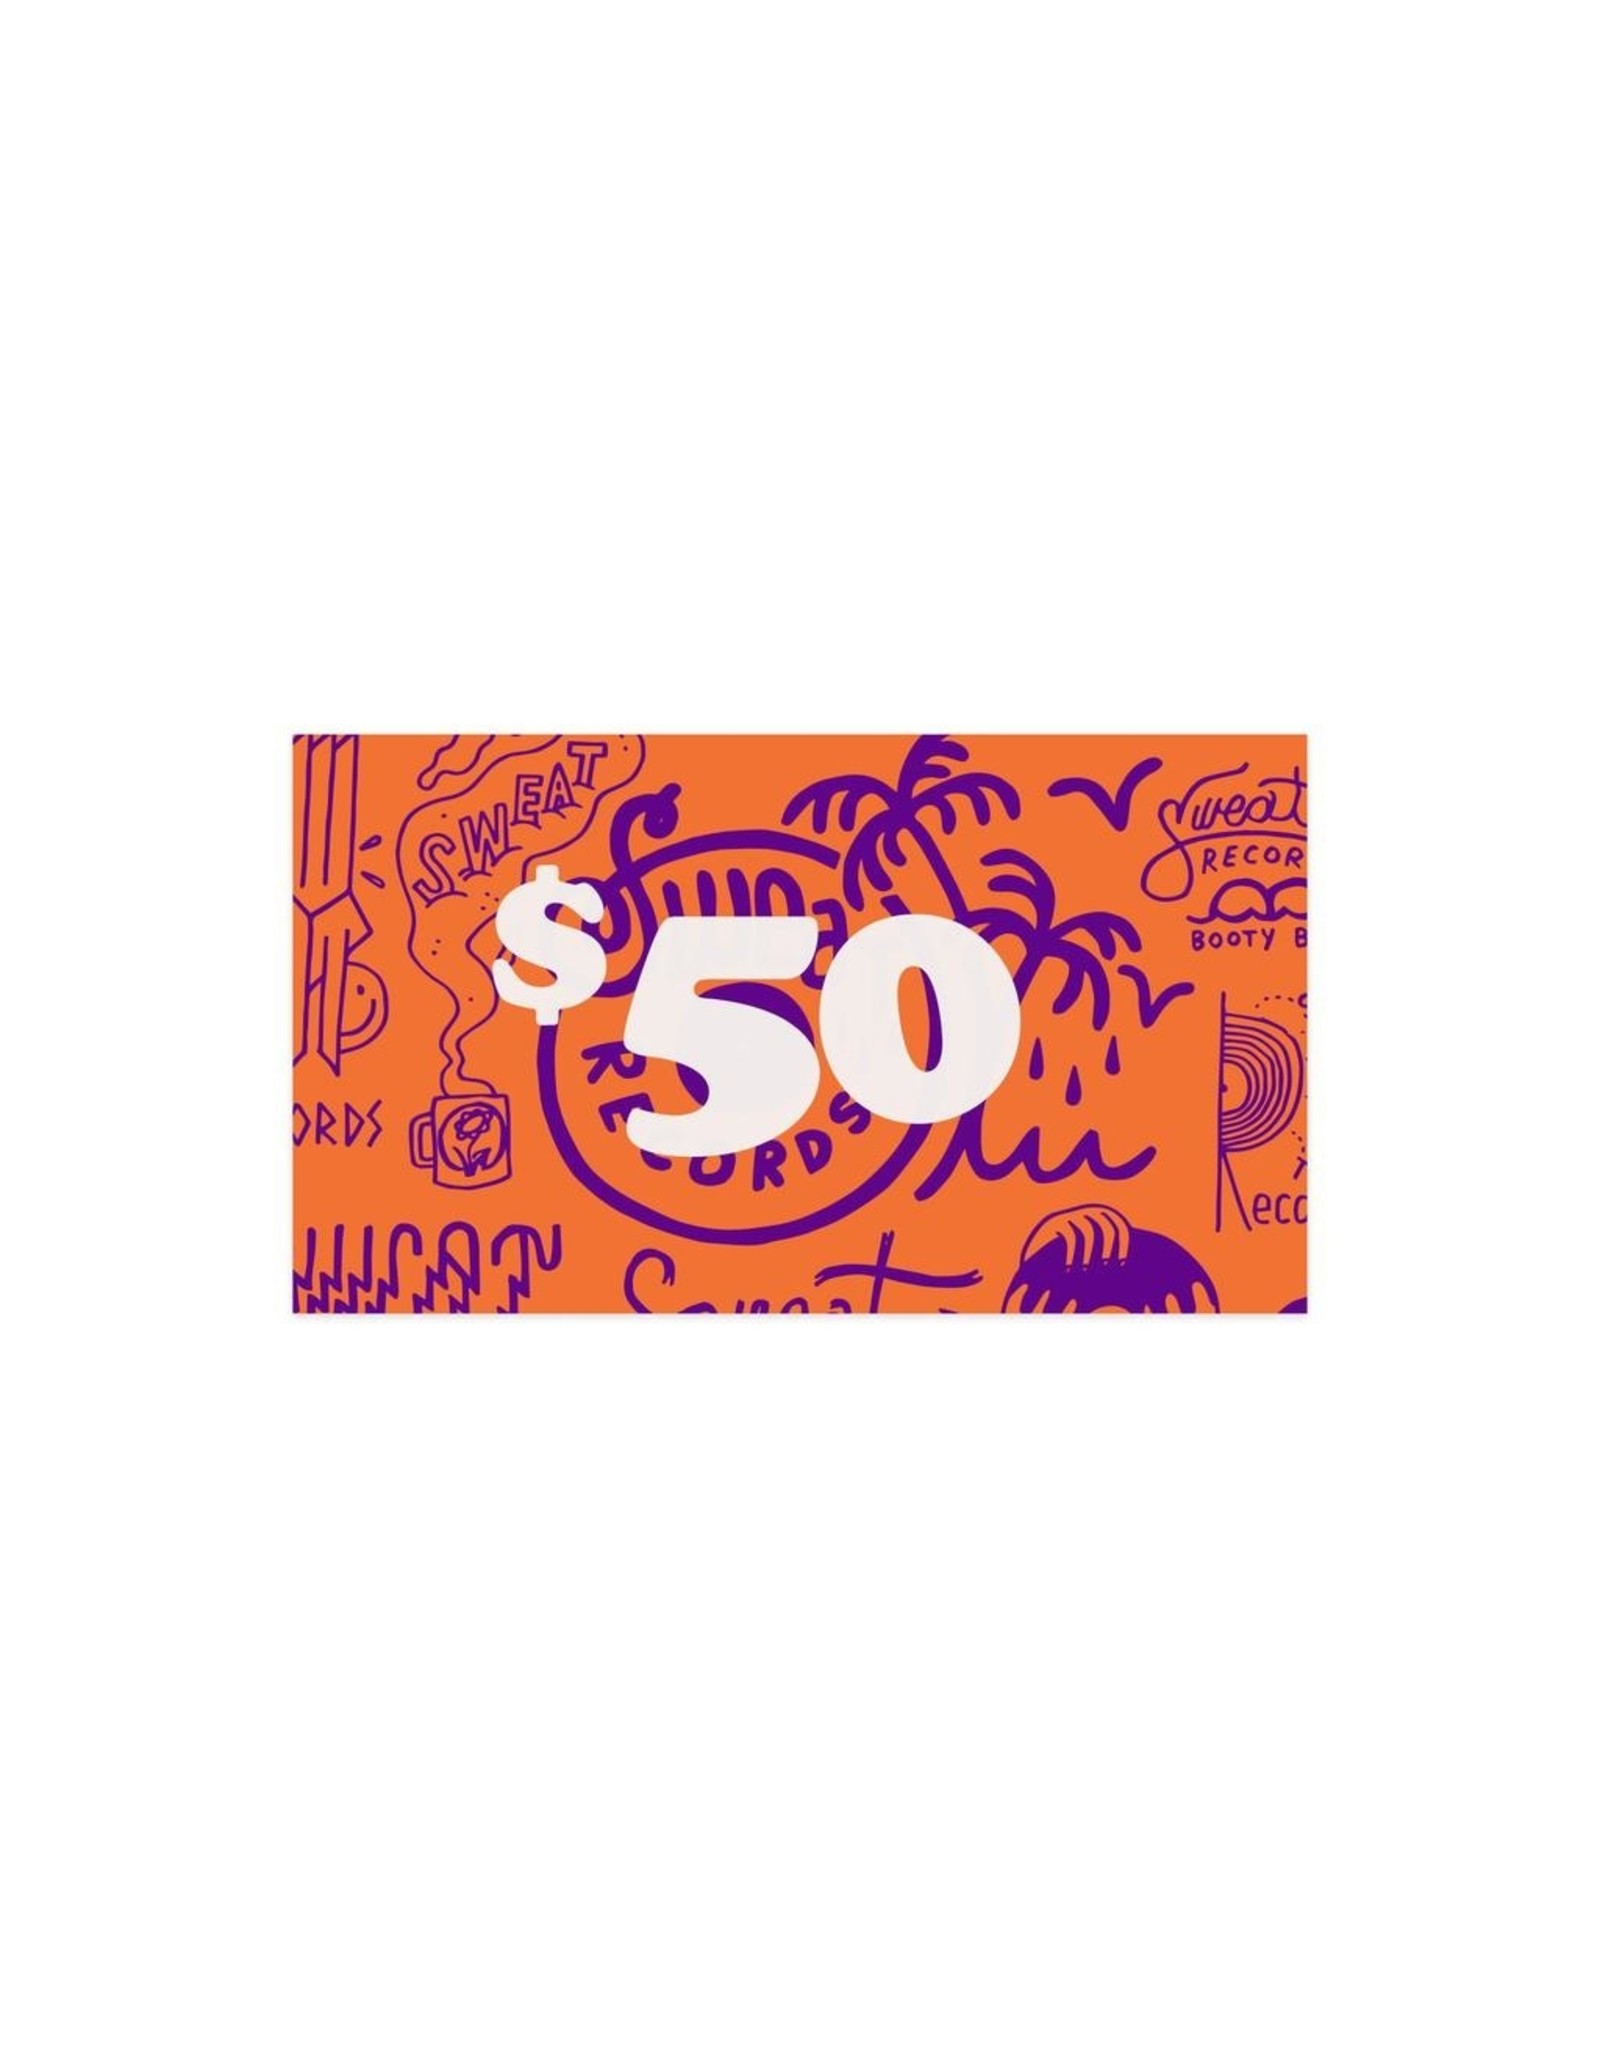 Gift Card $50 Sweat Records In-Store Gift Card